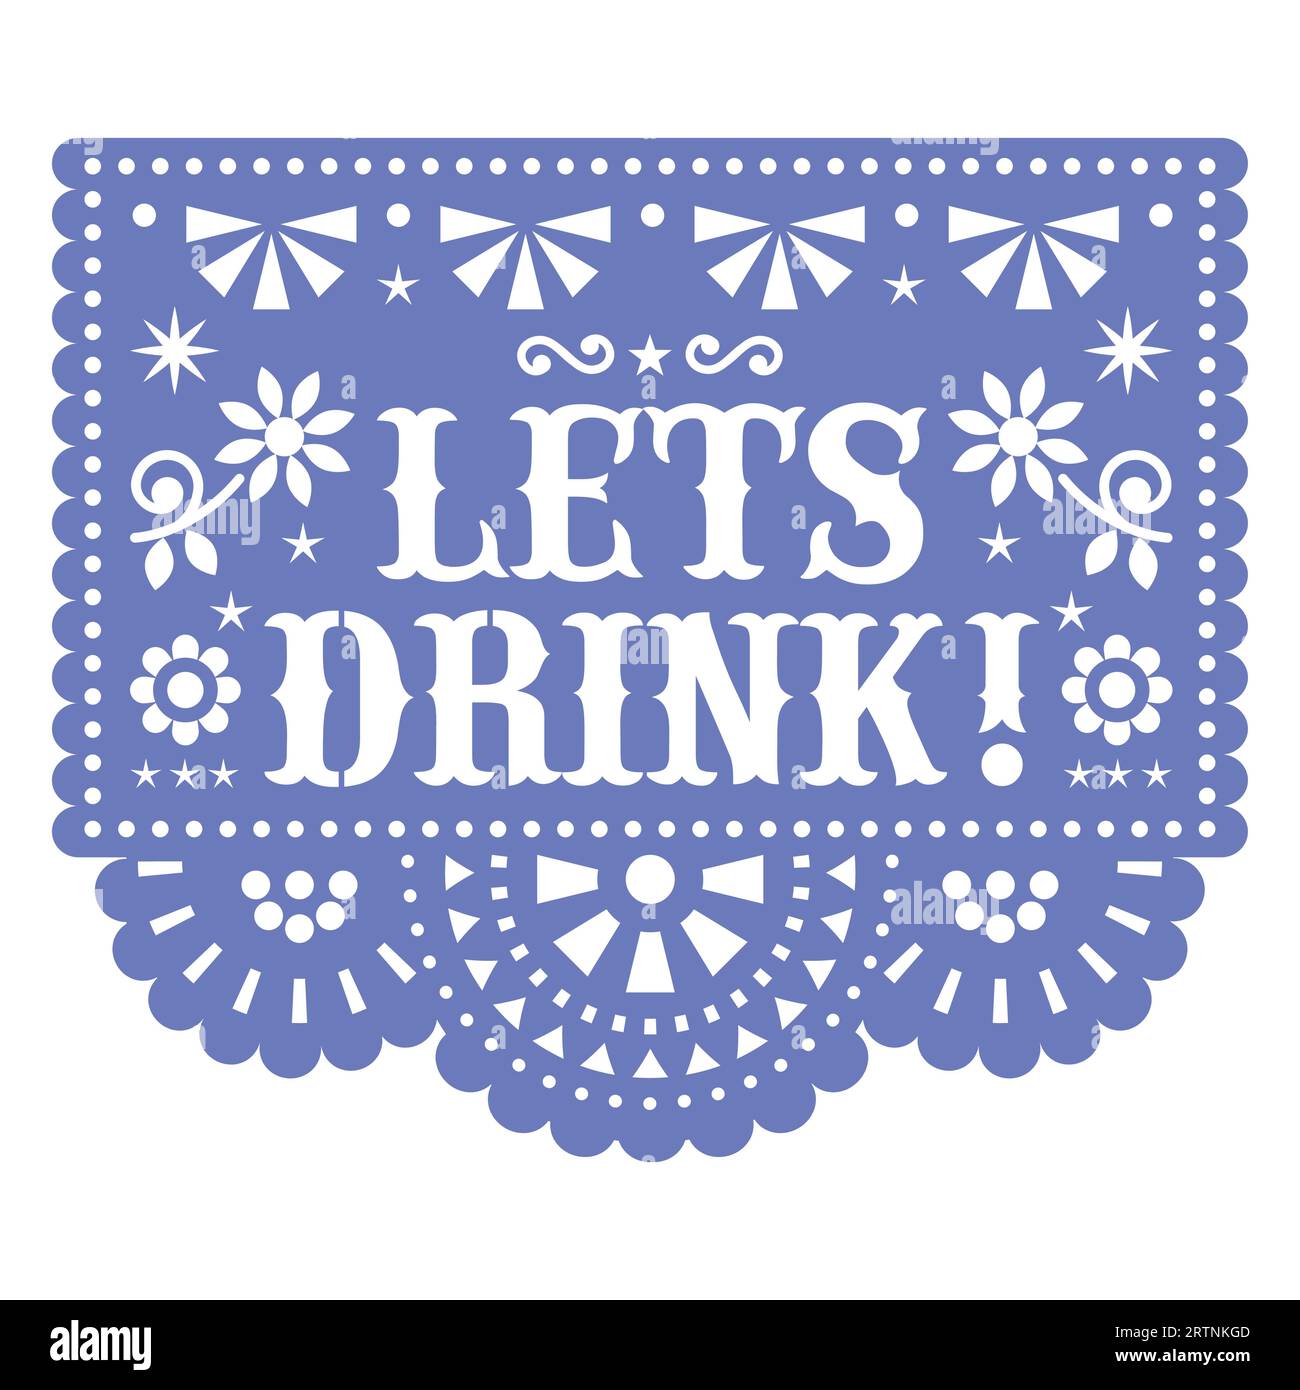 Let's drink Papel Picado vector design, Mexican cutout paper fiesta decoration in blue on white background Stock Vector